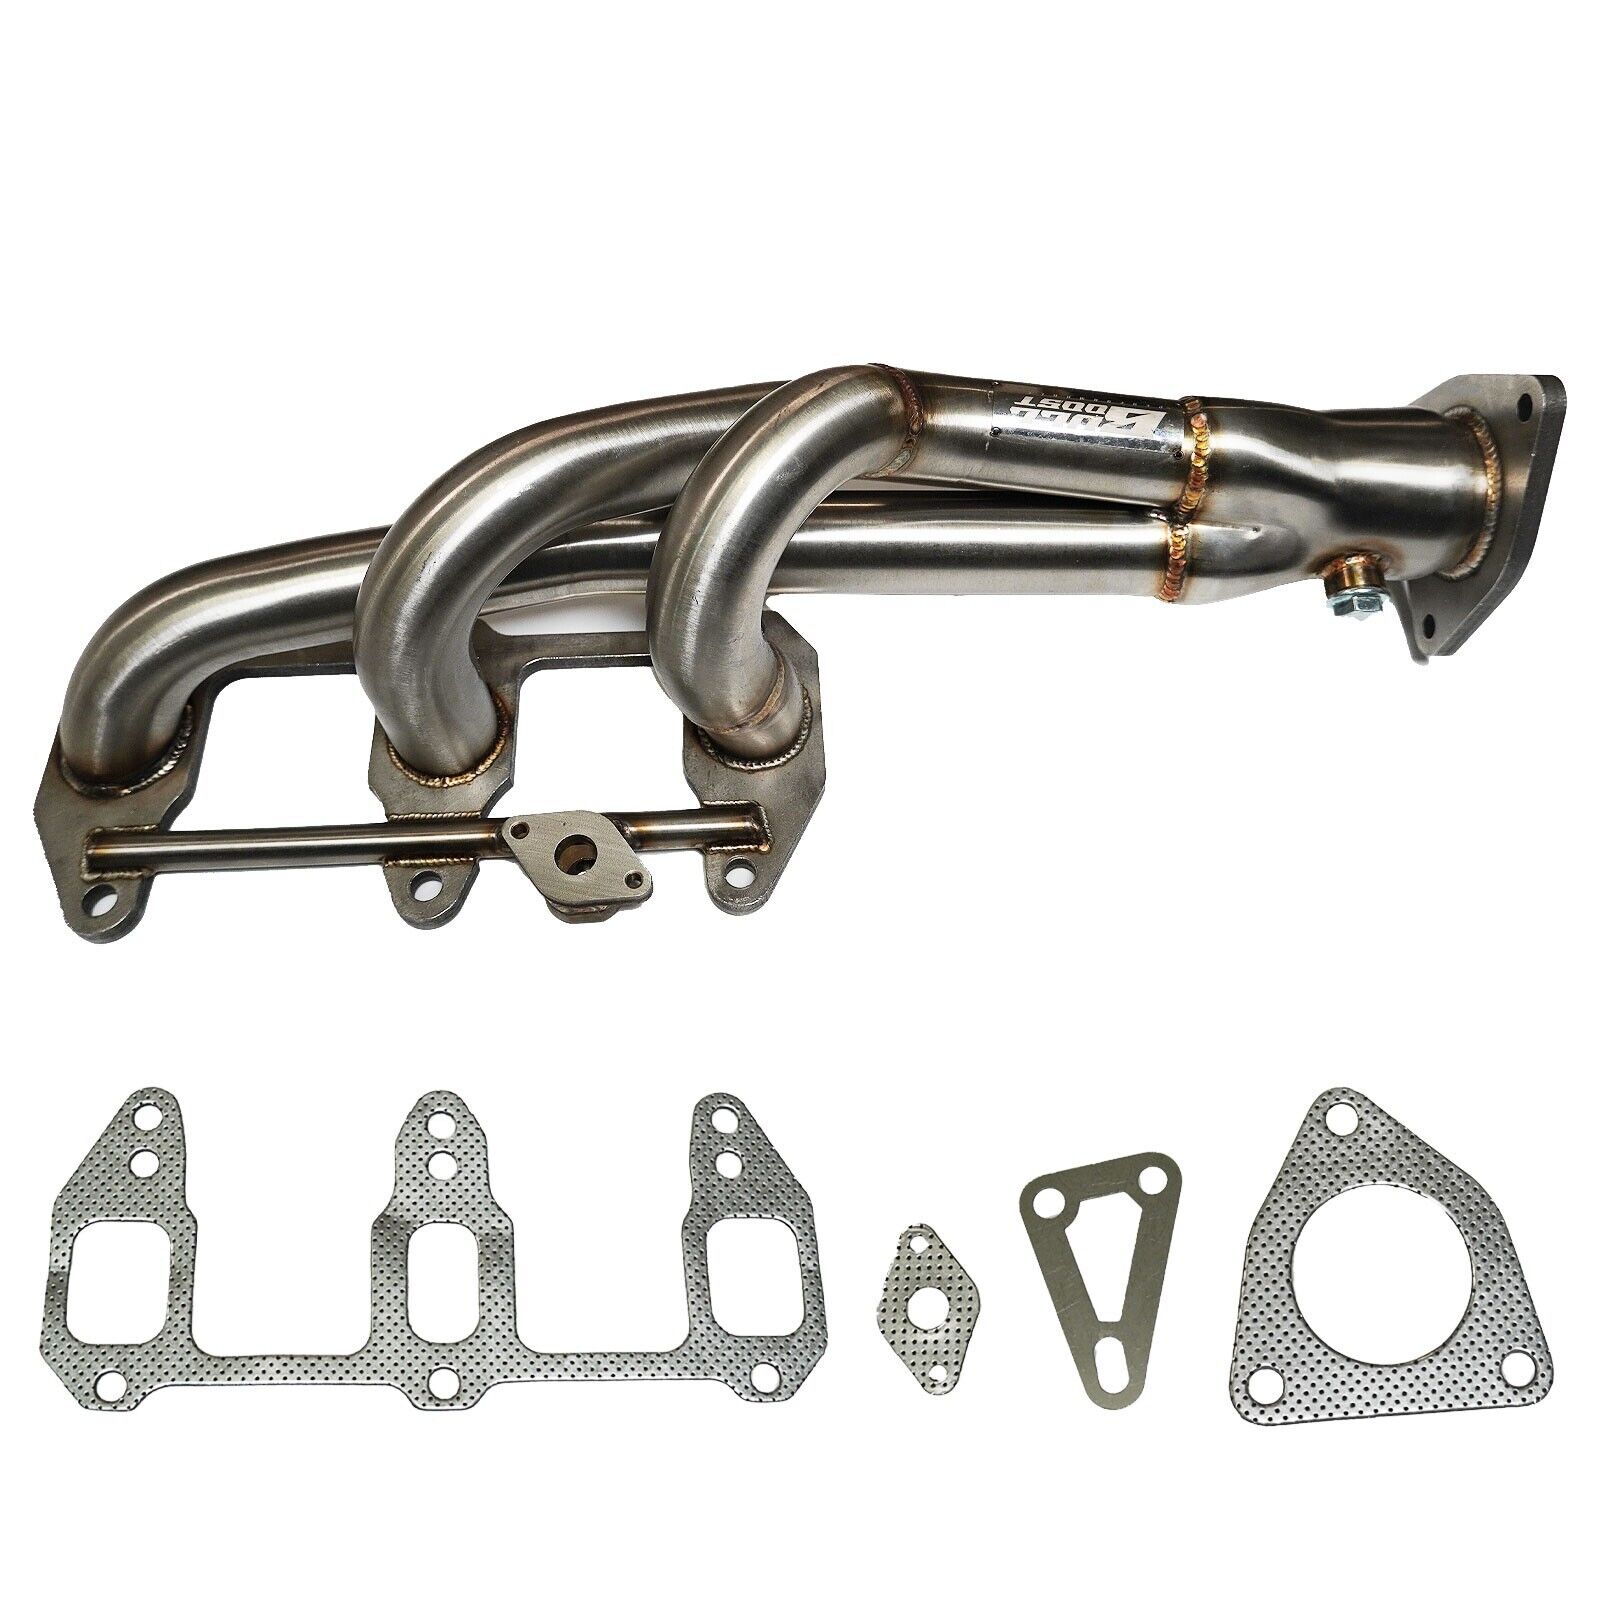 EXHAUST MANIFOLD STAINLESS STEEL 3-1 TUBULAR HEADER for 04-11 RX8 RX-8 SE3P 1.3L